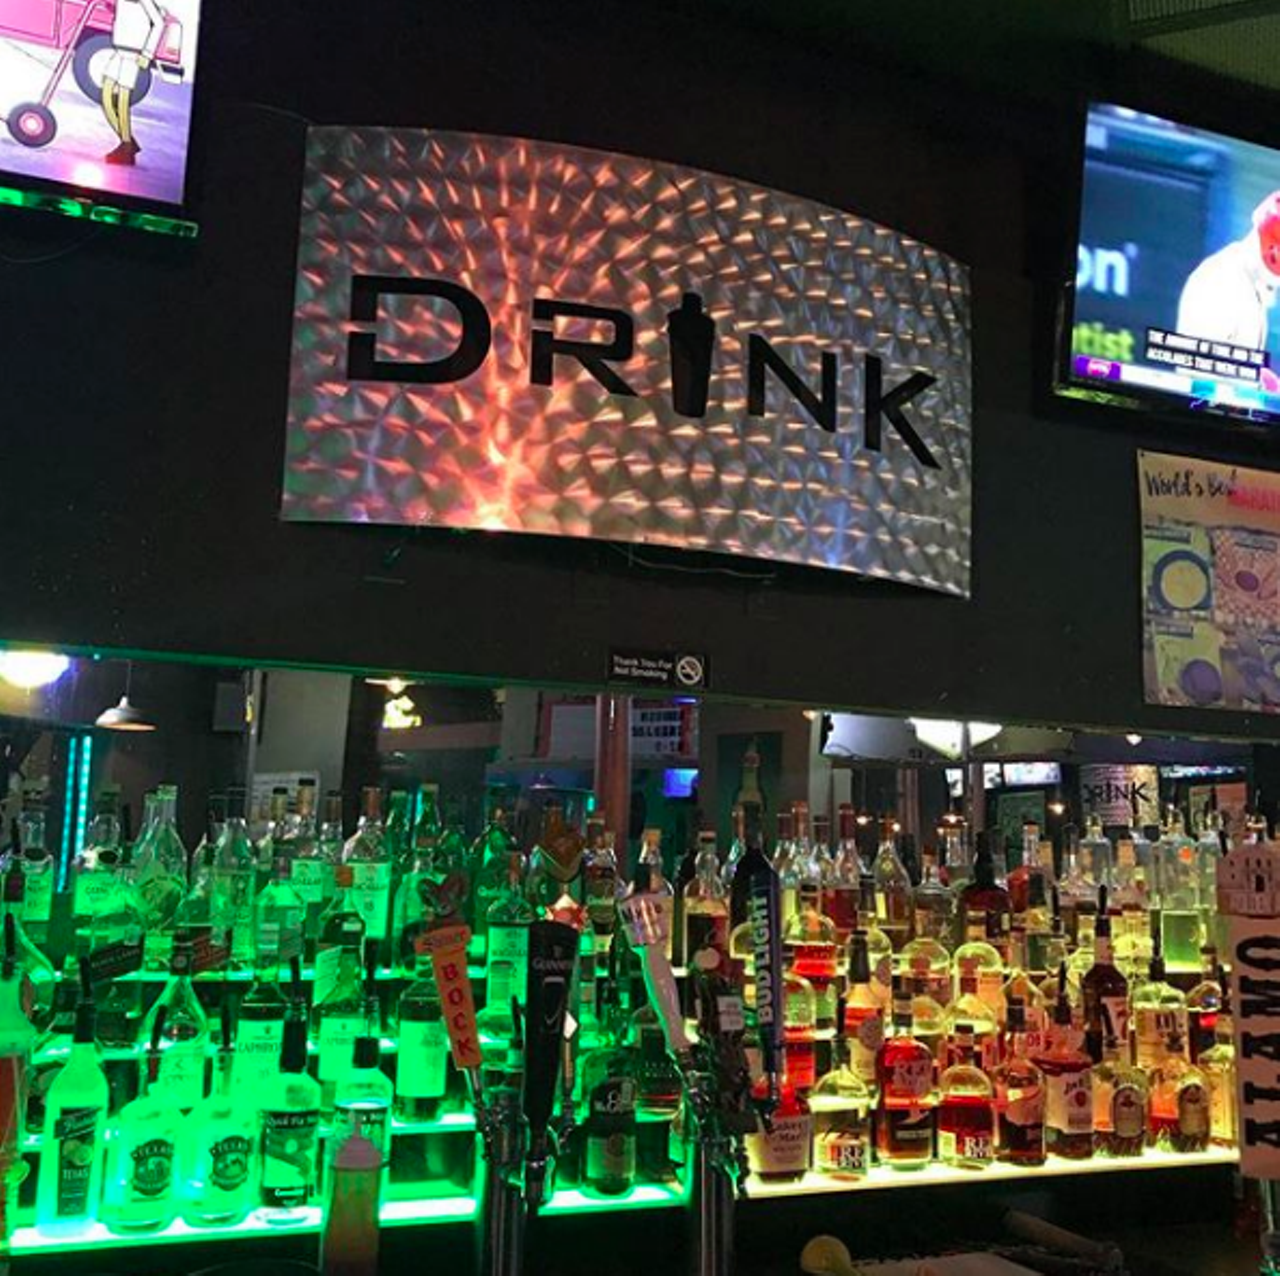 Drink Texas celebrates an underrated staple of bar life – darts. Nothing beats kicking back with a Texas special cocktail or refreshing draft beer while tossing a few darts with friends.
Photo via Instagram / mikeraute